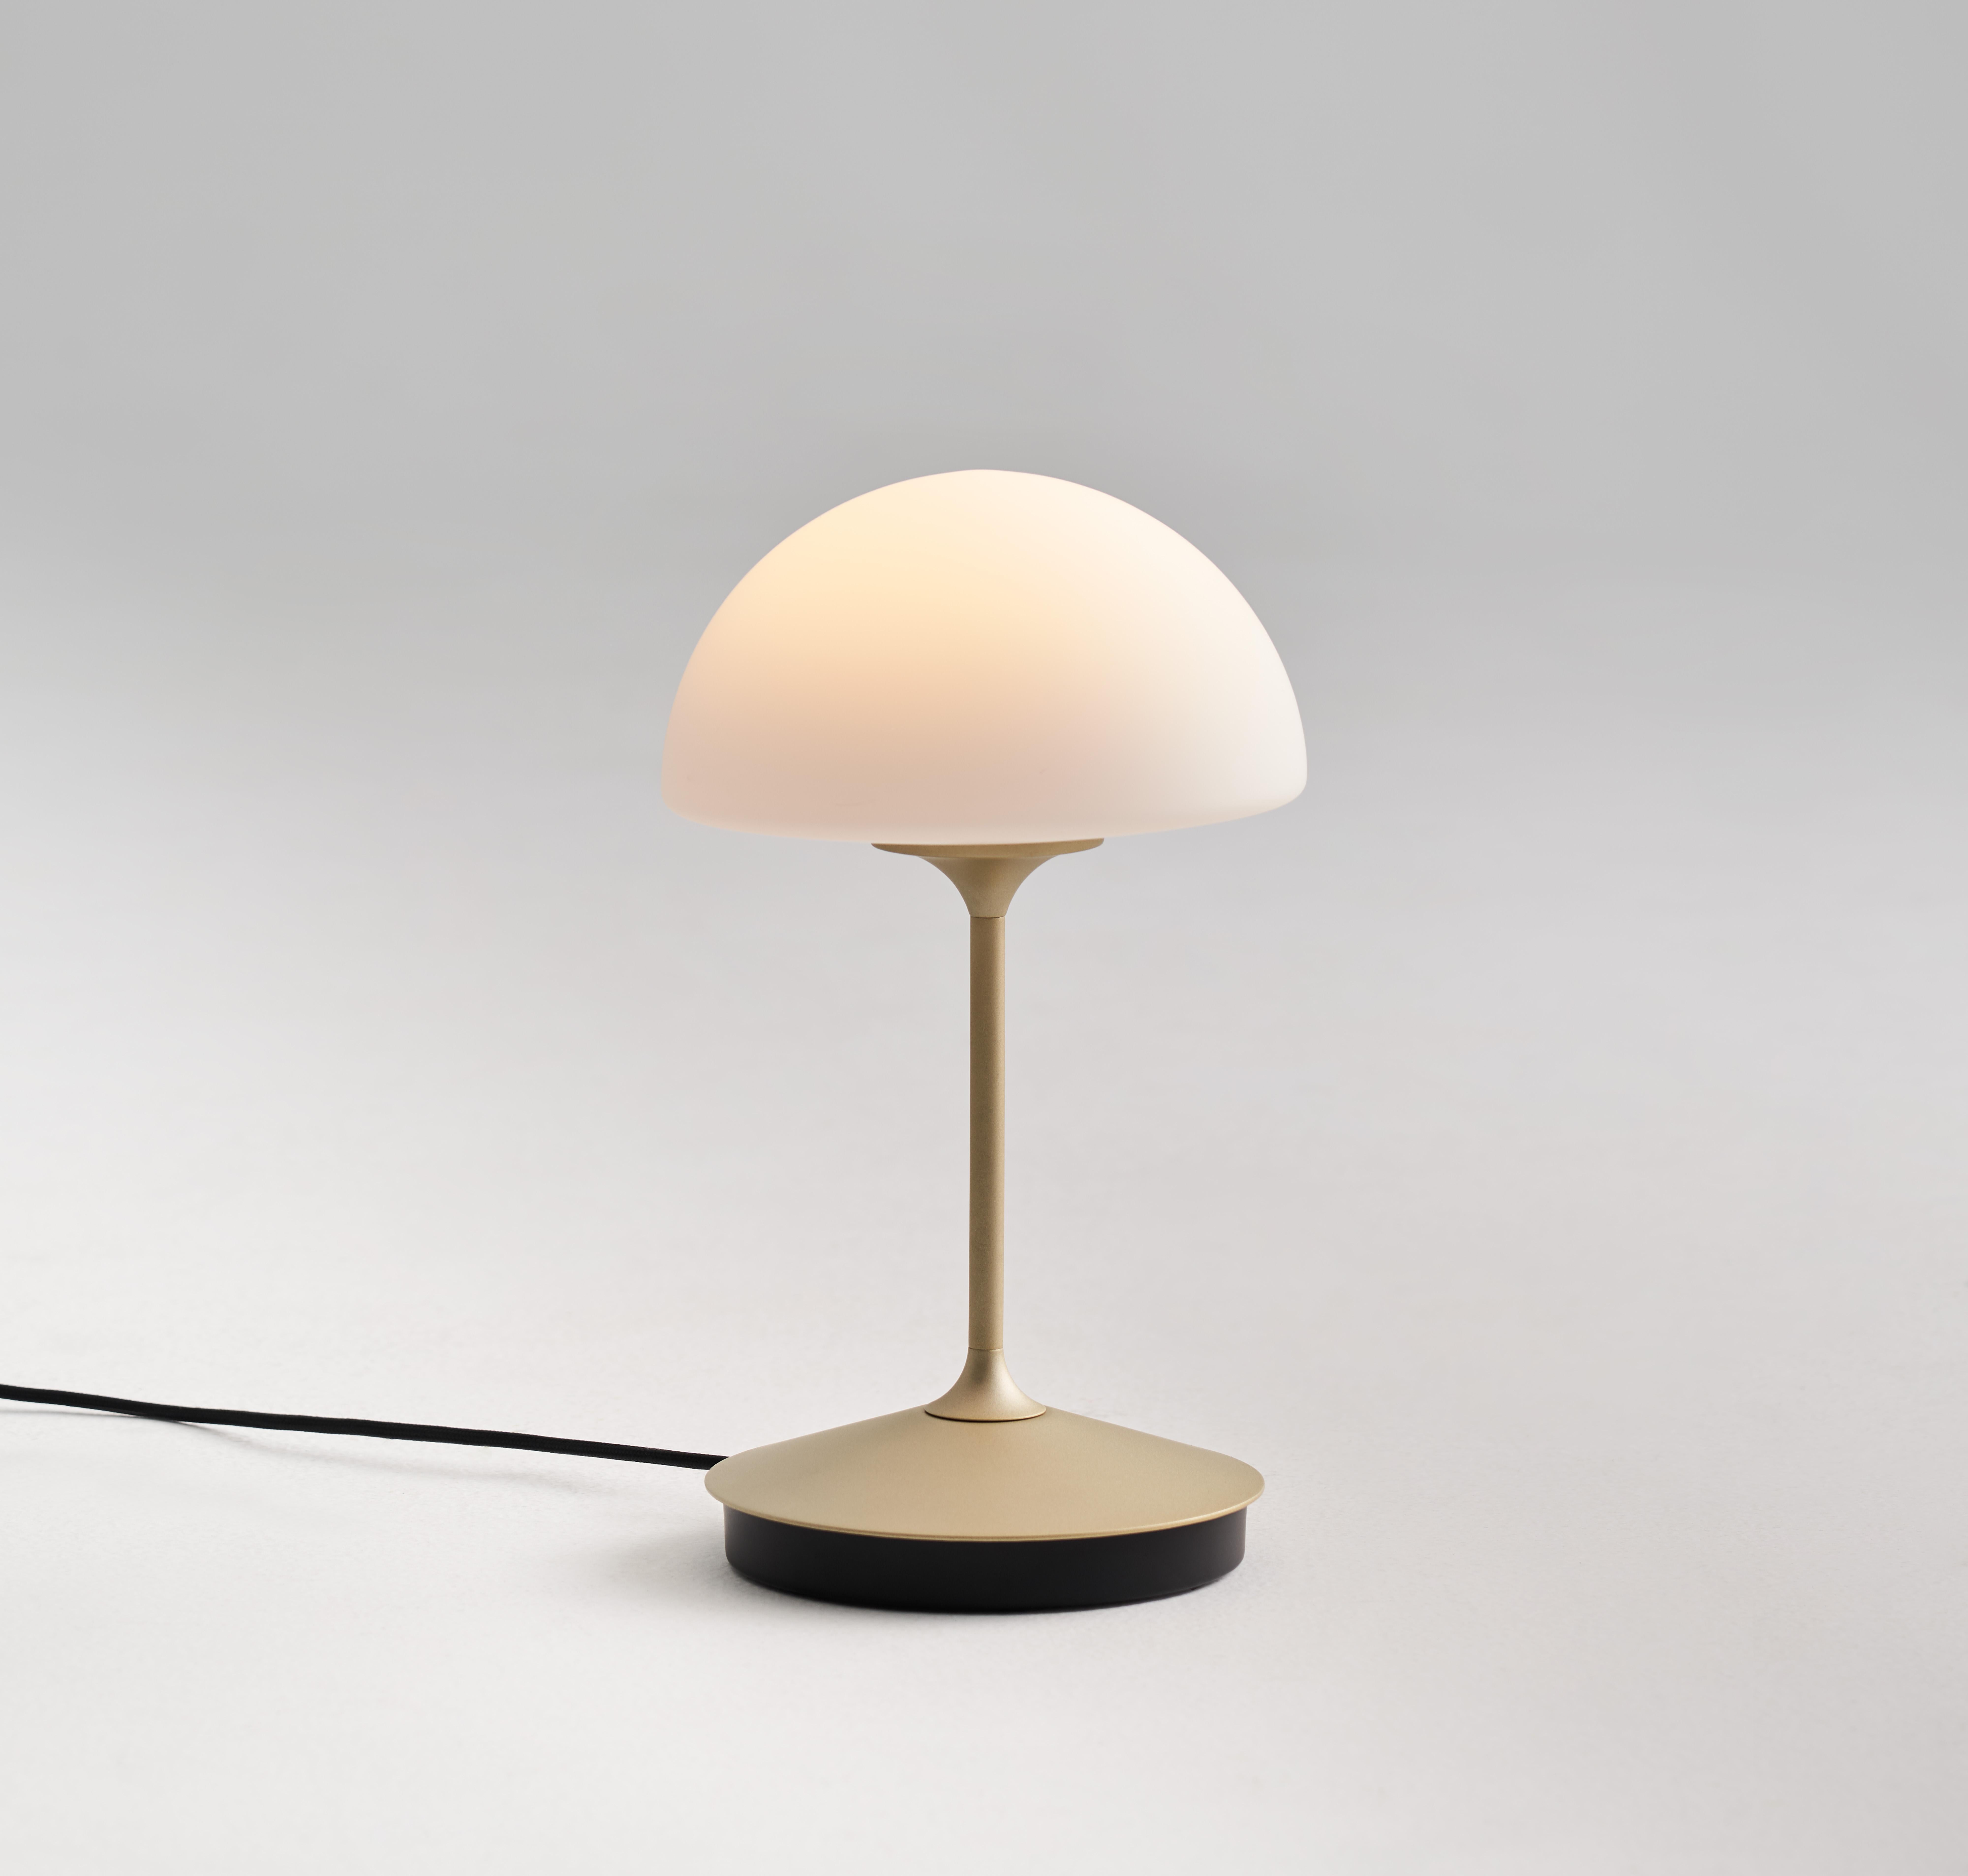 The Pensee is a refined and contemporary take on a timeless silhouette. With a classic profile and compact design, the new Pensee Table Lamp offers the best luminaire experience to date. Available both as a table lamp or wall lamp, the PENSÉE emits